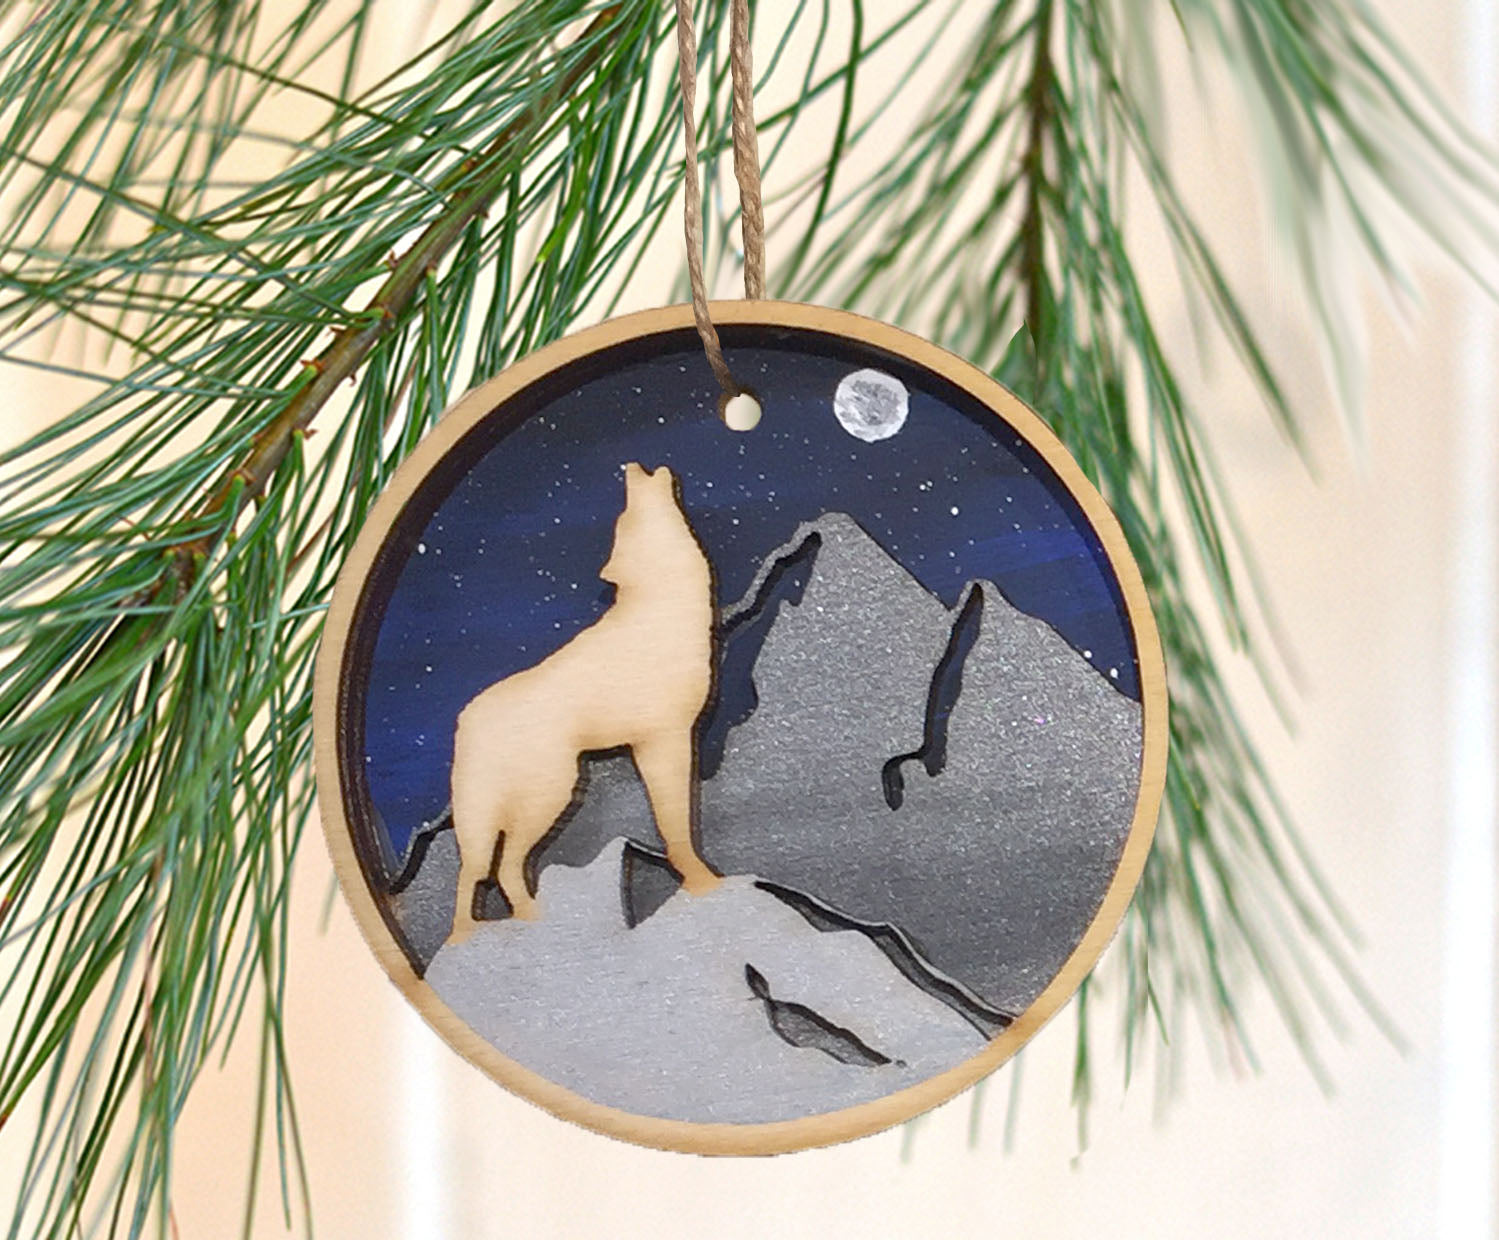 DIY Diamond Painting Table Ornament Wooden Wolf